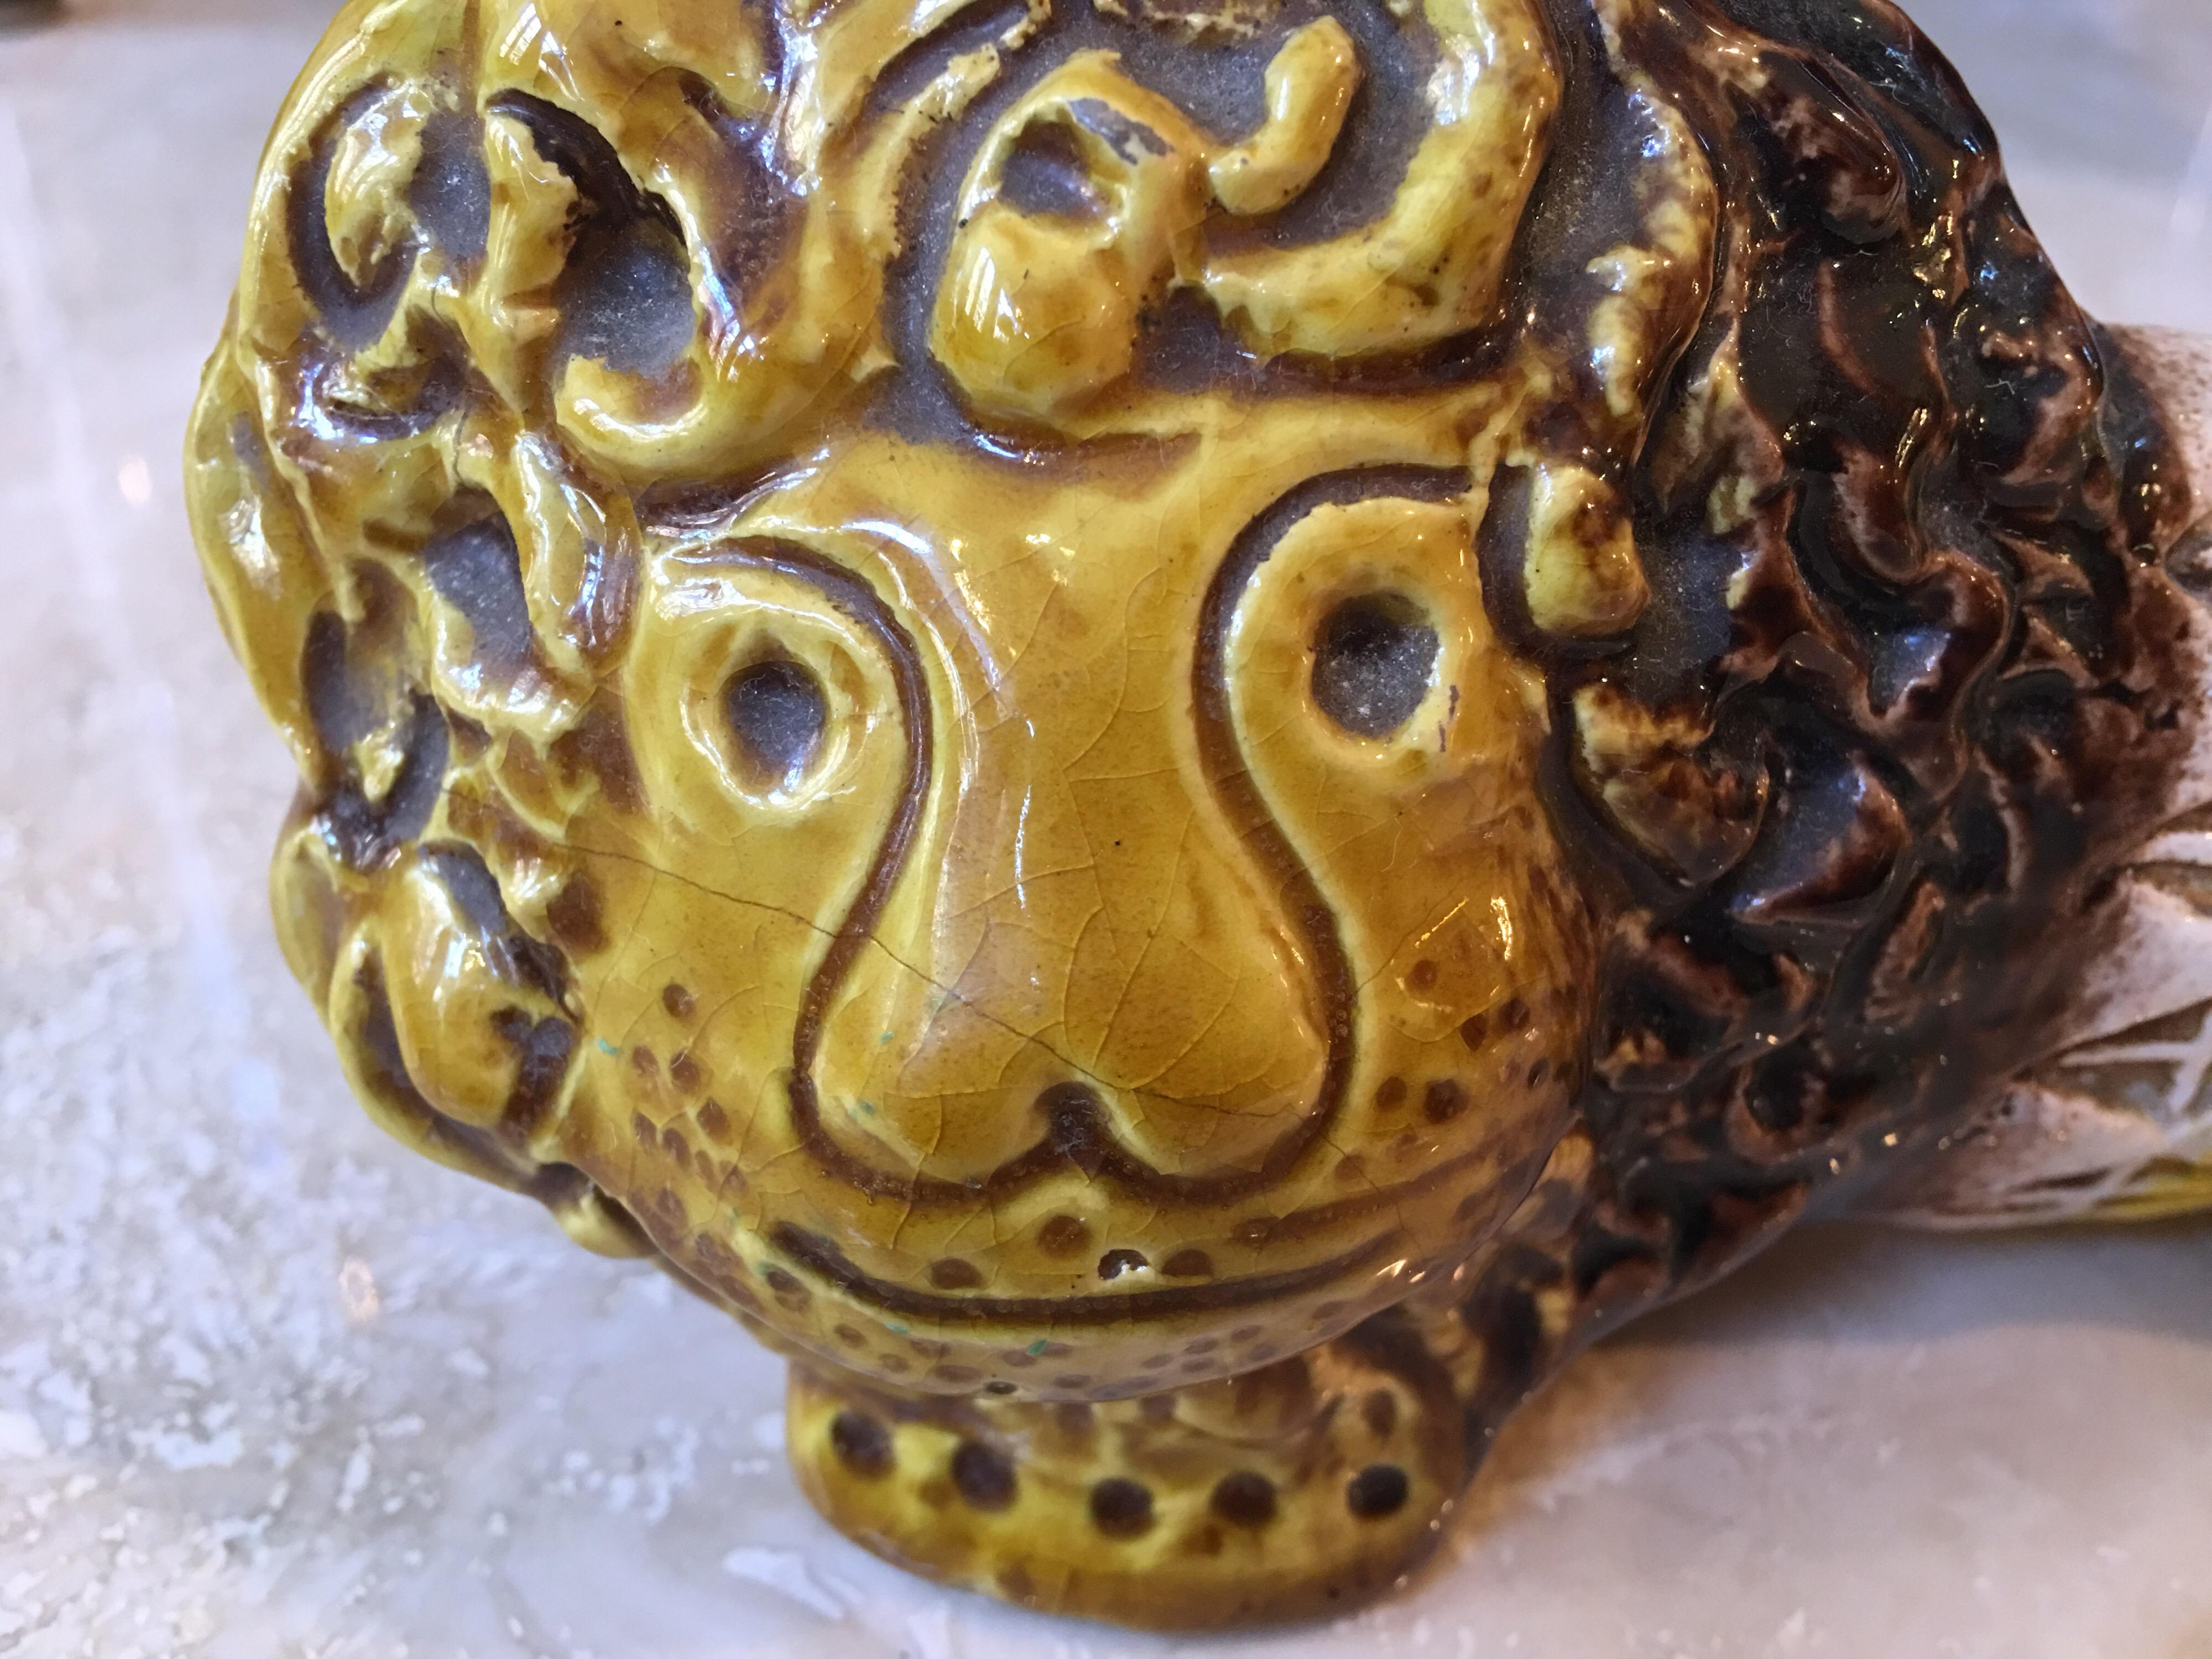 Aldo Londi for Bitossi ceramic lion in shades of yellow and browns. Little more uncommon color pallet than the more often seen blue. Glaze shows some crazing and one spot on top of tail where it might of touched the kiln wall. Overall presents very